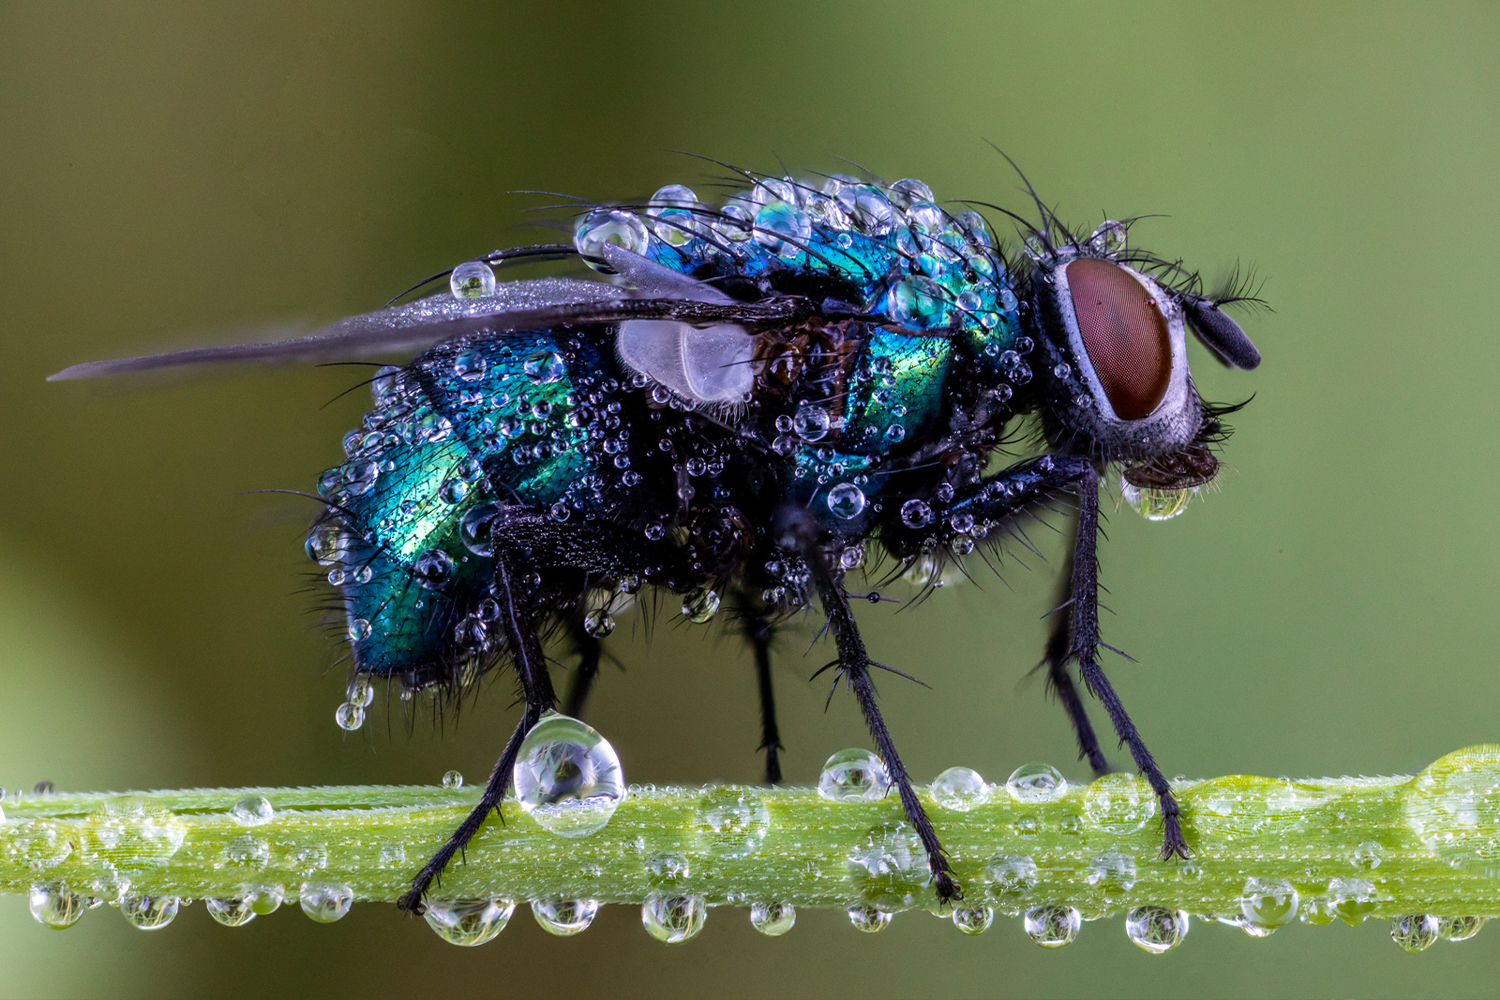 CANON LIVE | HOW TO DO MACRO PHOTOGRAPHY WITH OLIVER WRIGHT